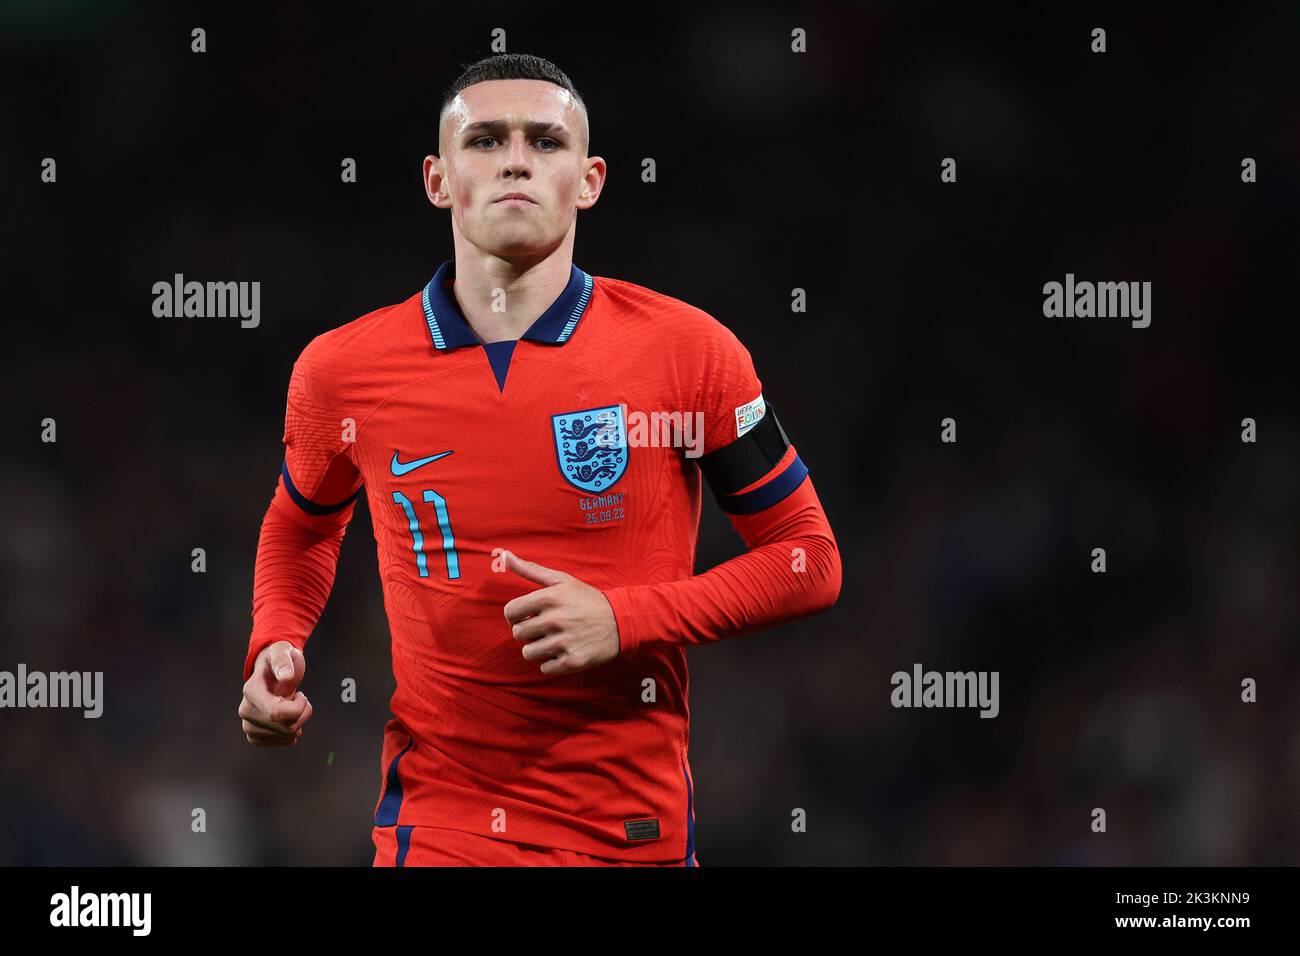 London, UK. 26th Sep, 2022. Phil Foden of England looks on. England v Germany, UEFA Nations league International group C match at Wembley Stadium in London on Monday 26th September 2022. Editorial use only. pic by Andrew Orchard/Andrew Orchard sports photography/Alamy Live News Credit: Andrew Orchard sports photography/Alamy Live News Stock Photo